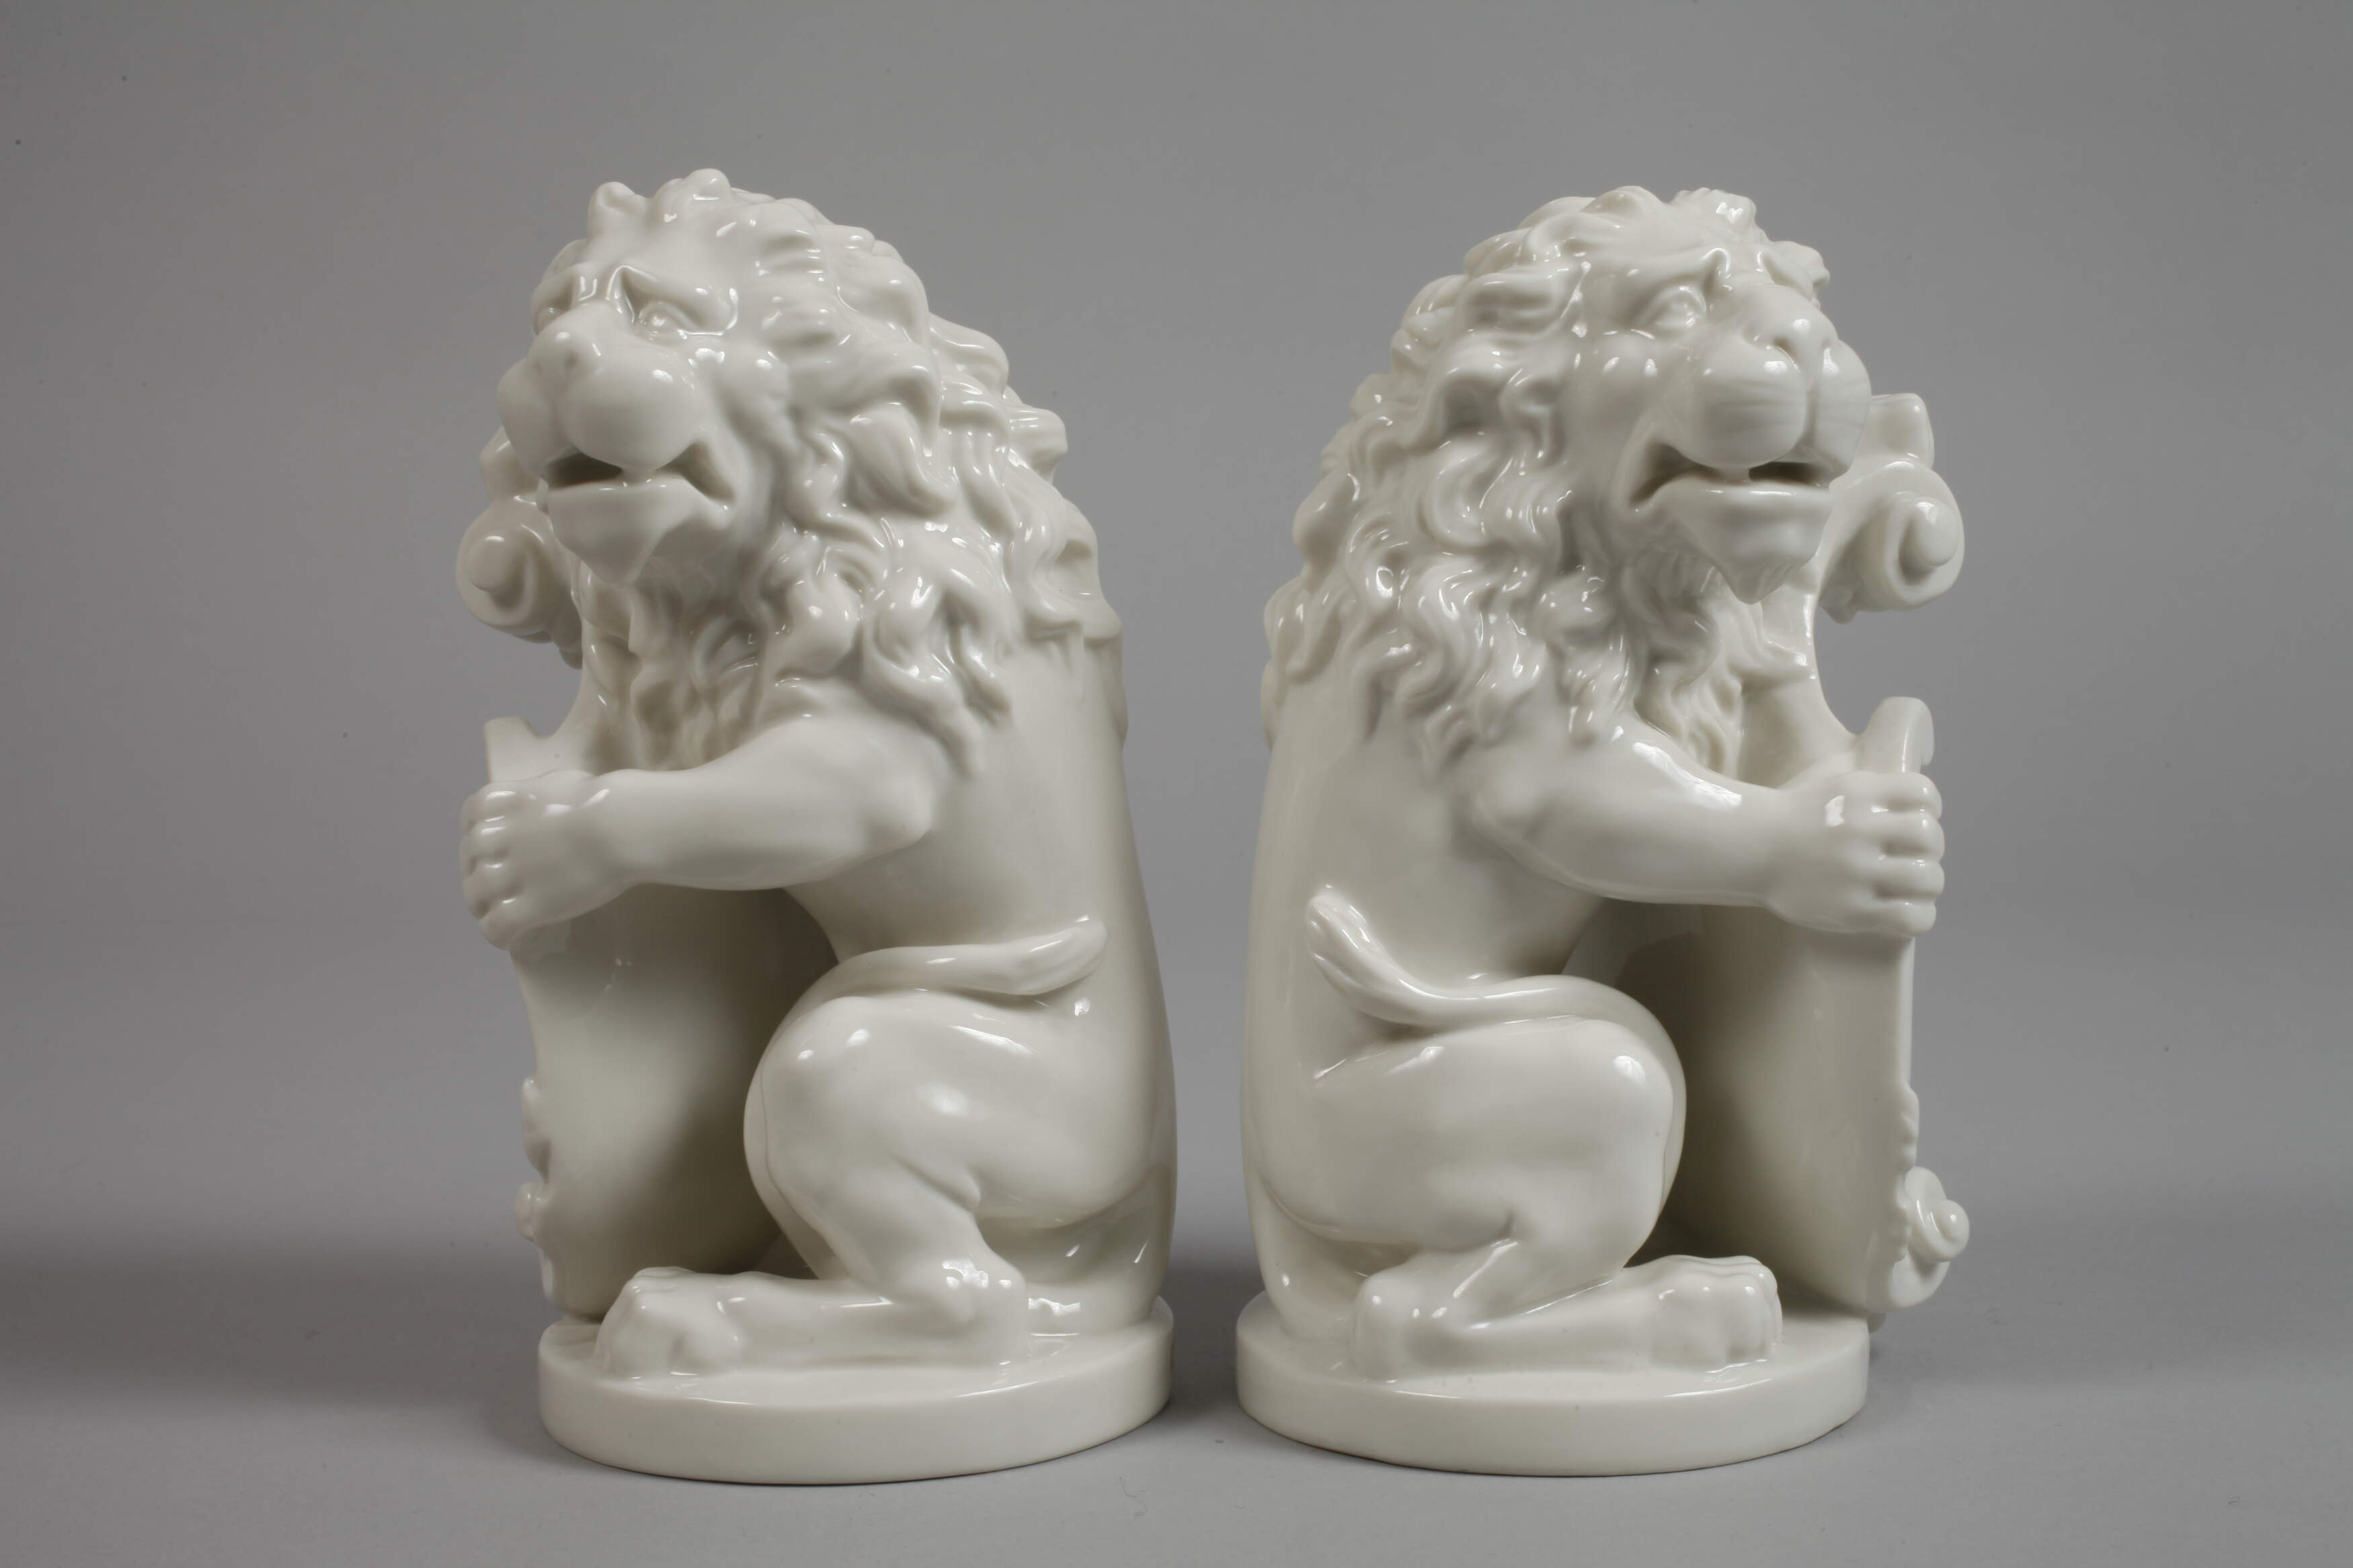 Nymphenburg pair "Lion with (Bavarian) coat of arms" - Image 3 of 5